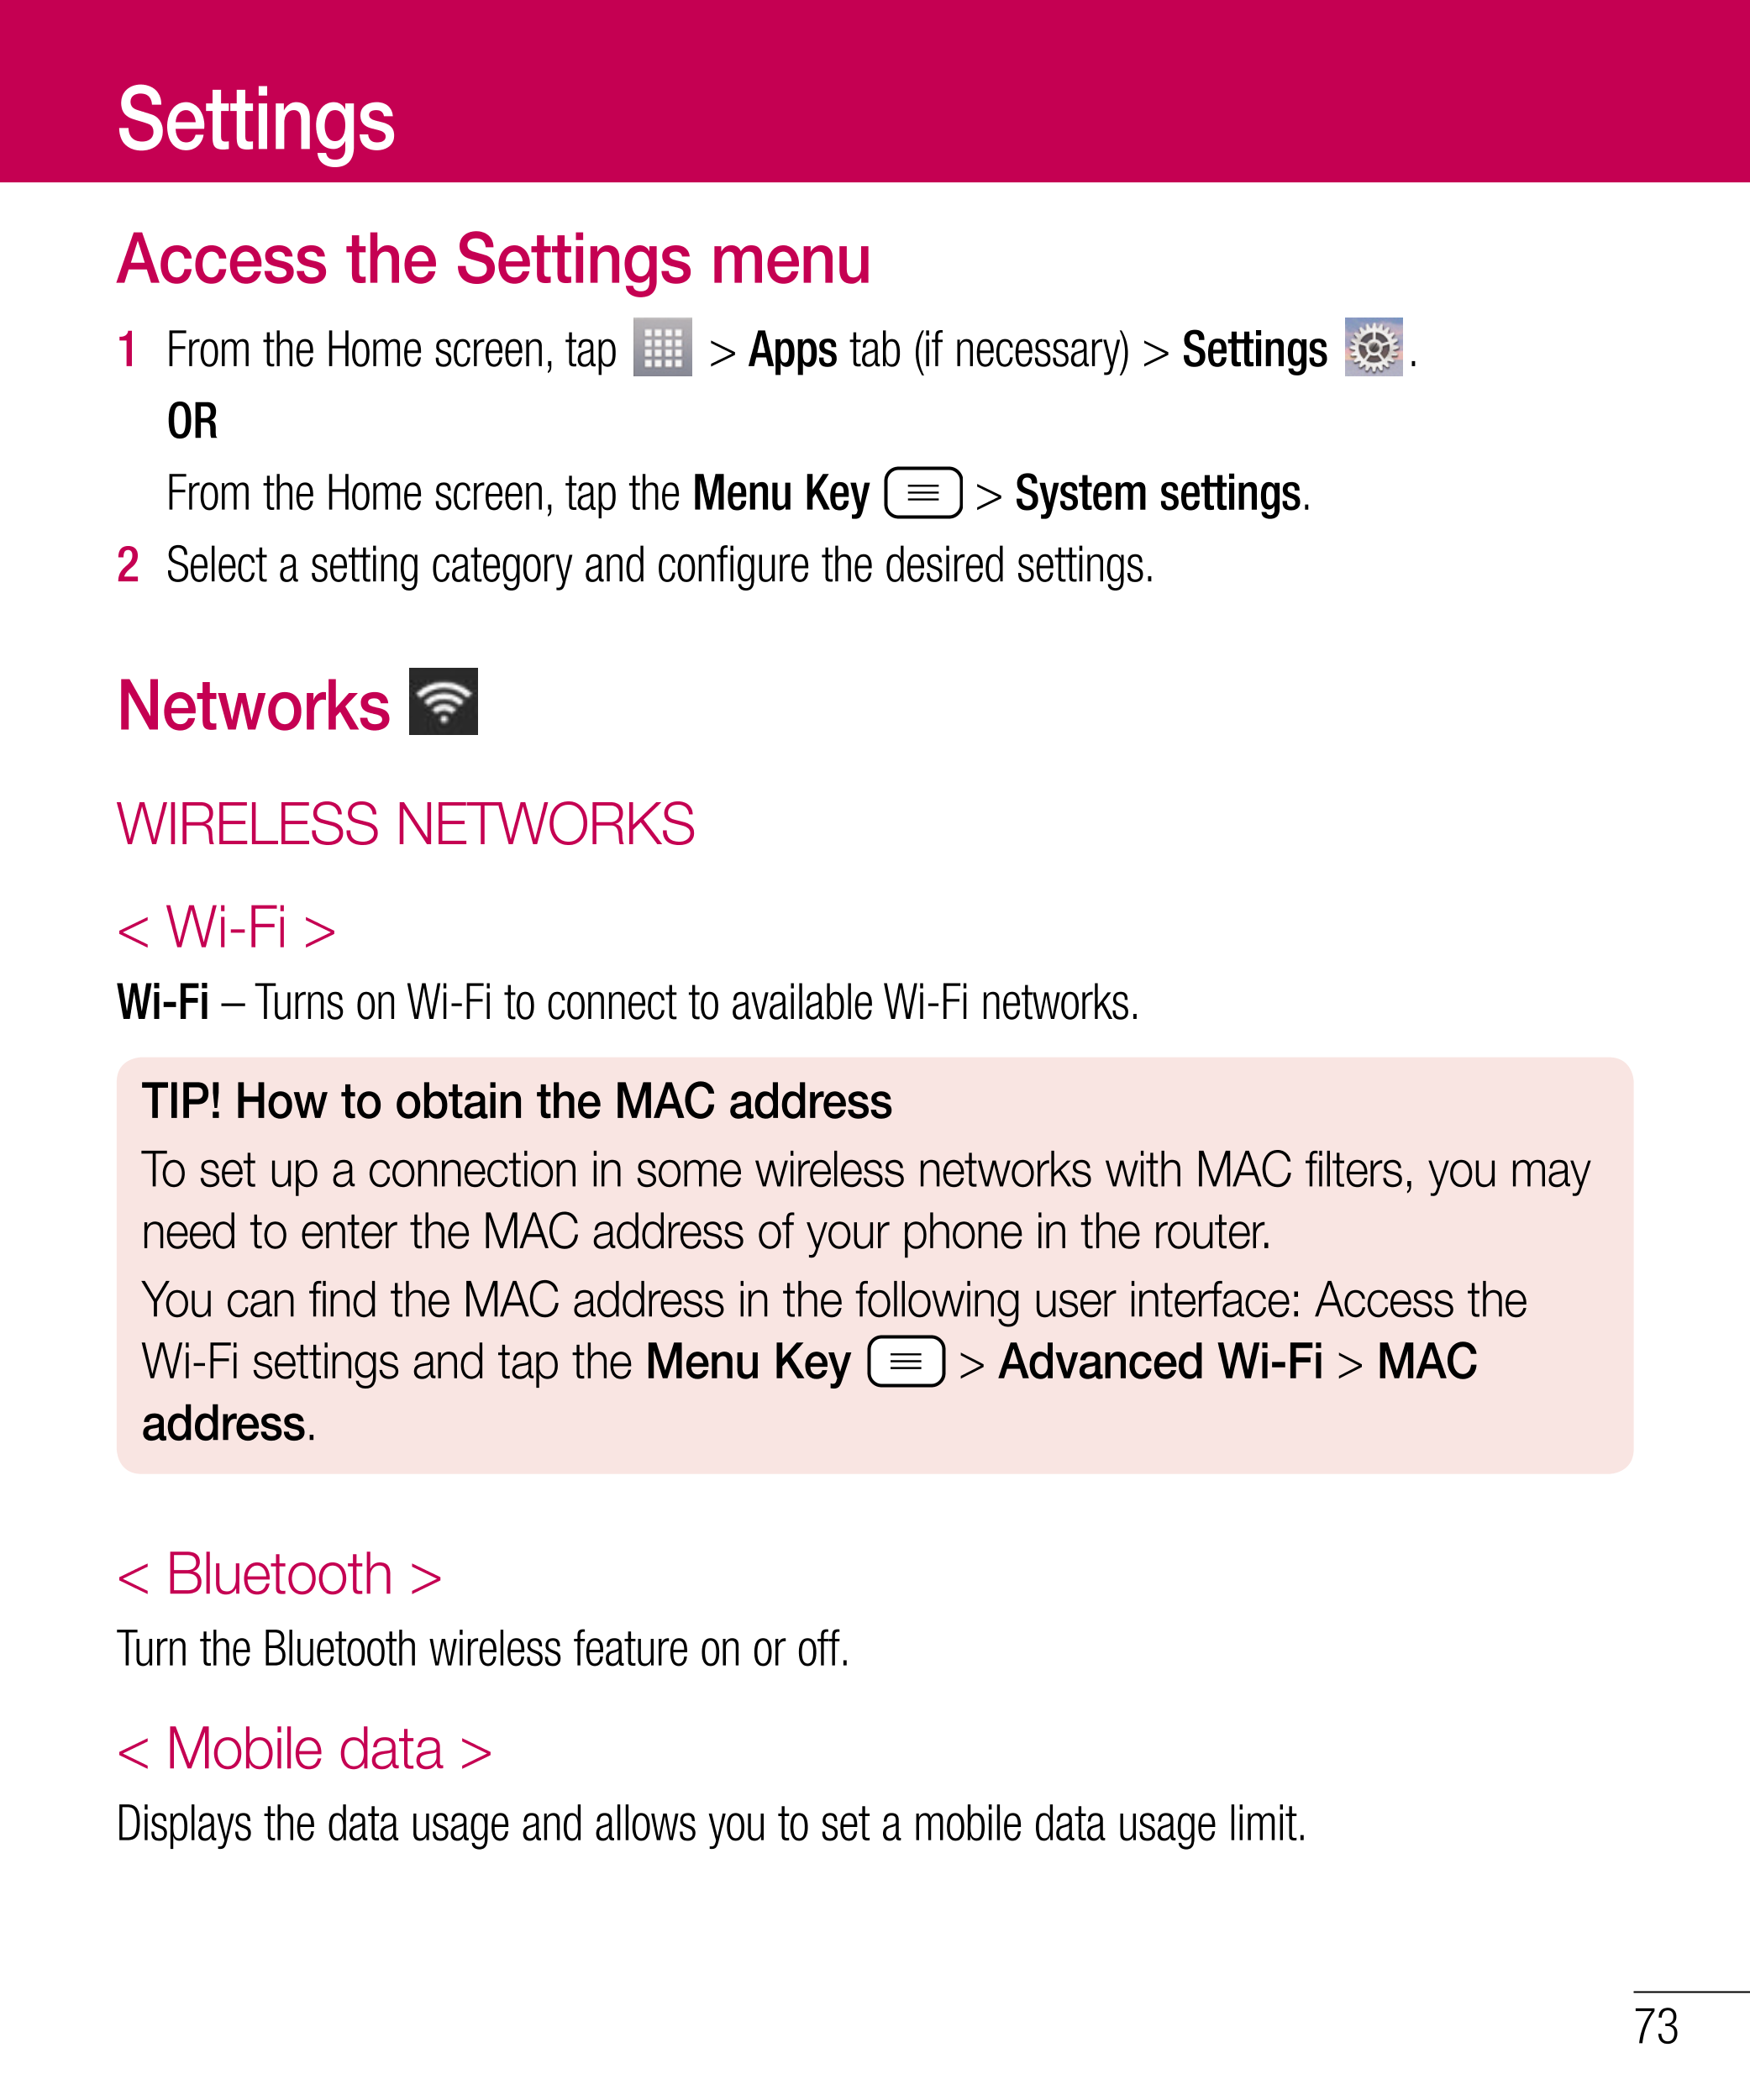 Settings
Access the Settings menu
1  From the Home screen, tap   > Apps tab (if necessary) > Settings  .
  OR
     From the Home